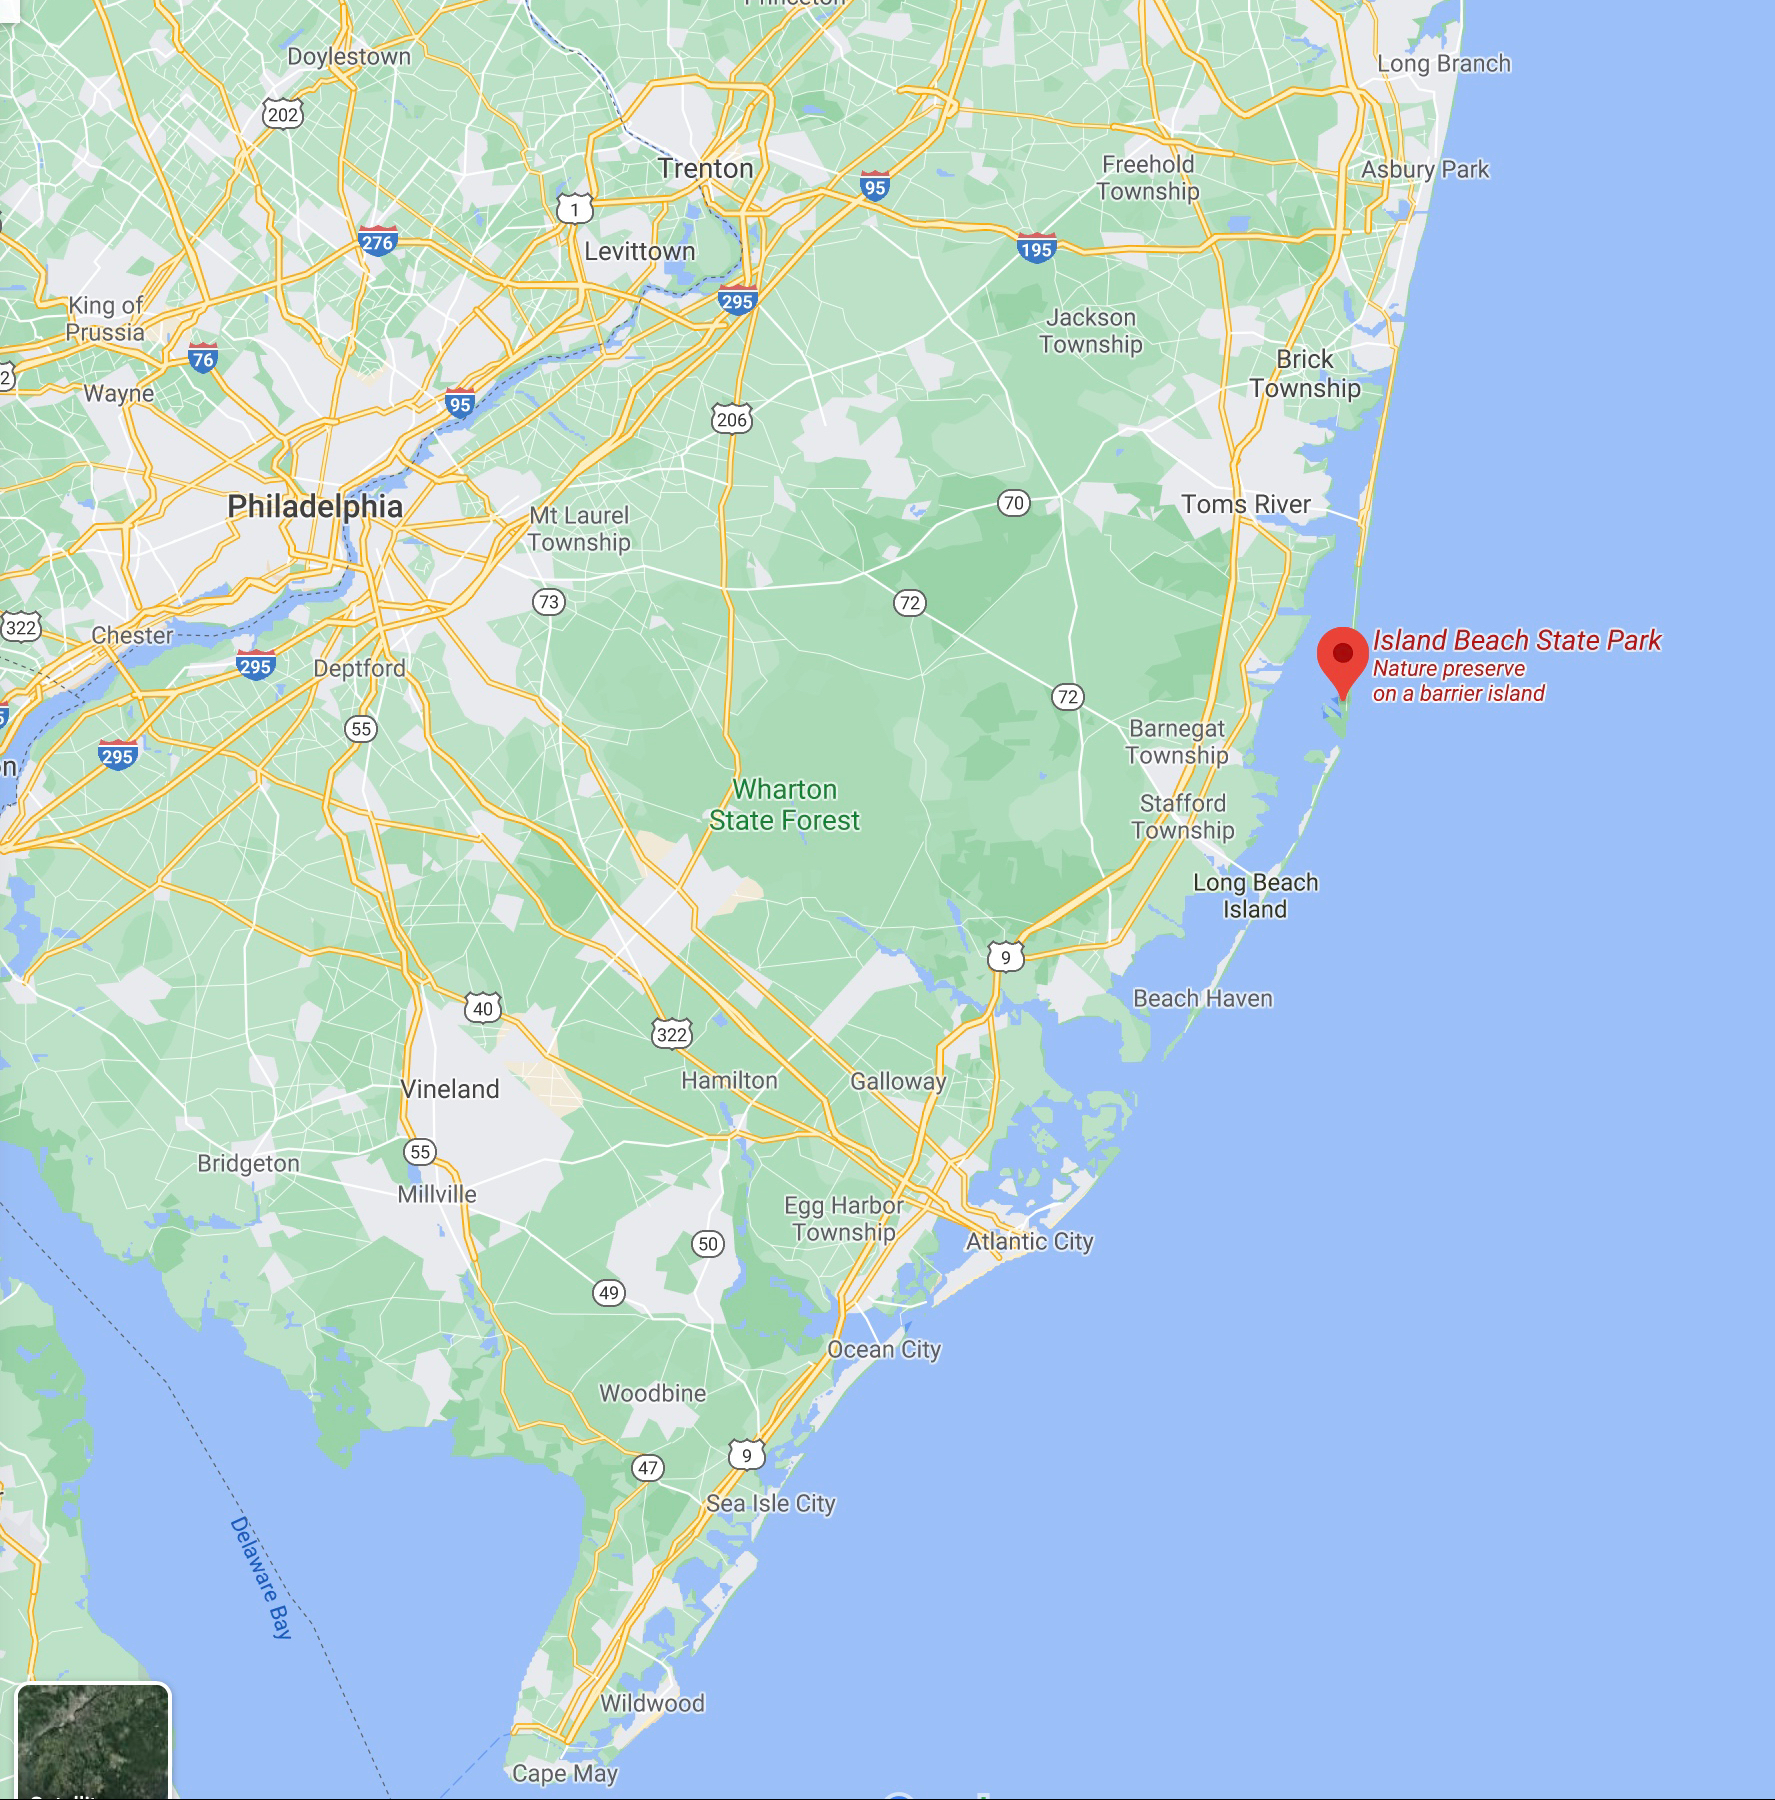 Map of New Jersey Shore, with a red pin in location of Island Beach State Park